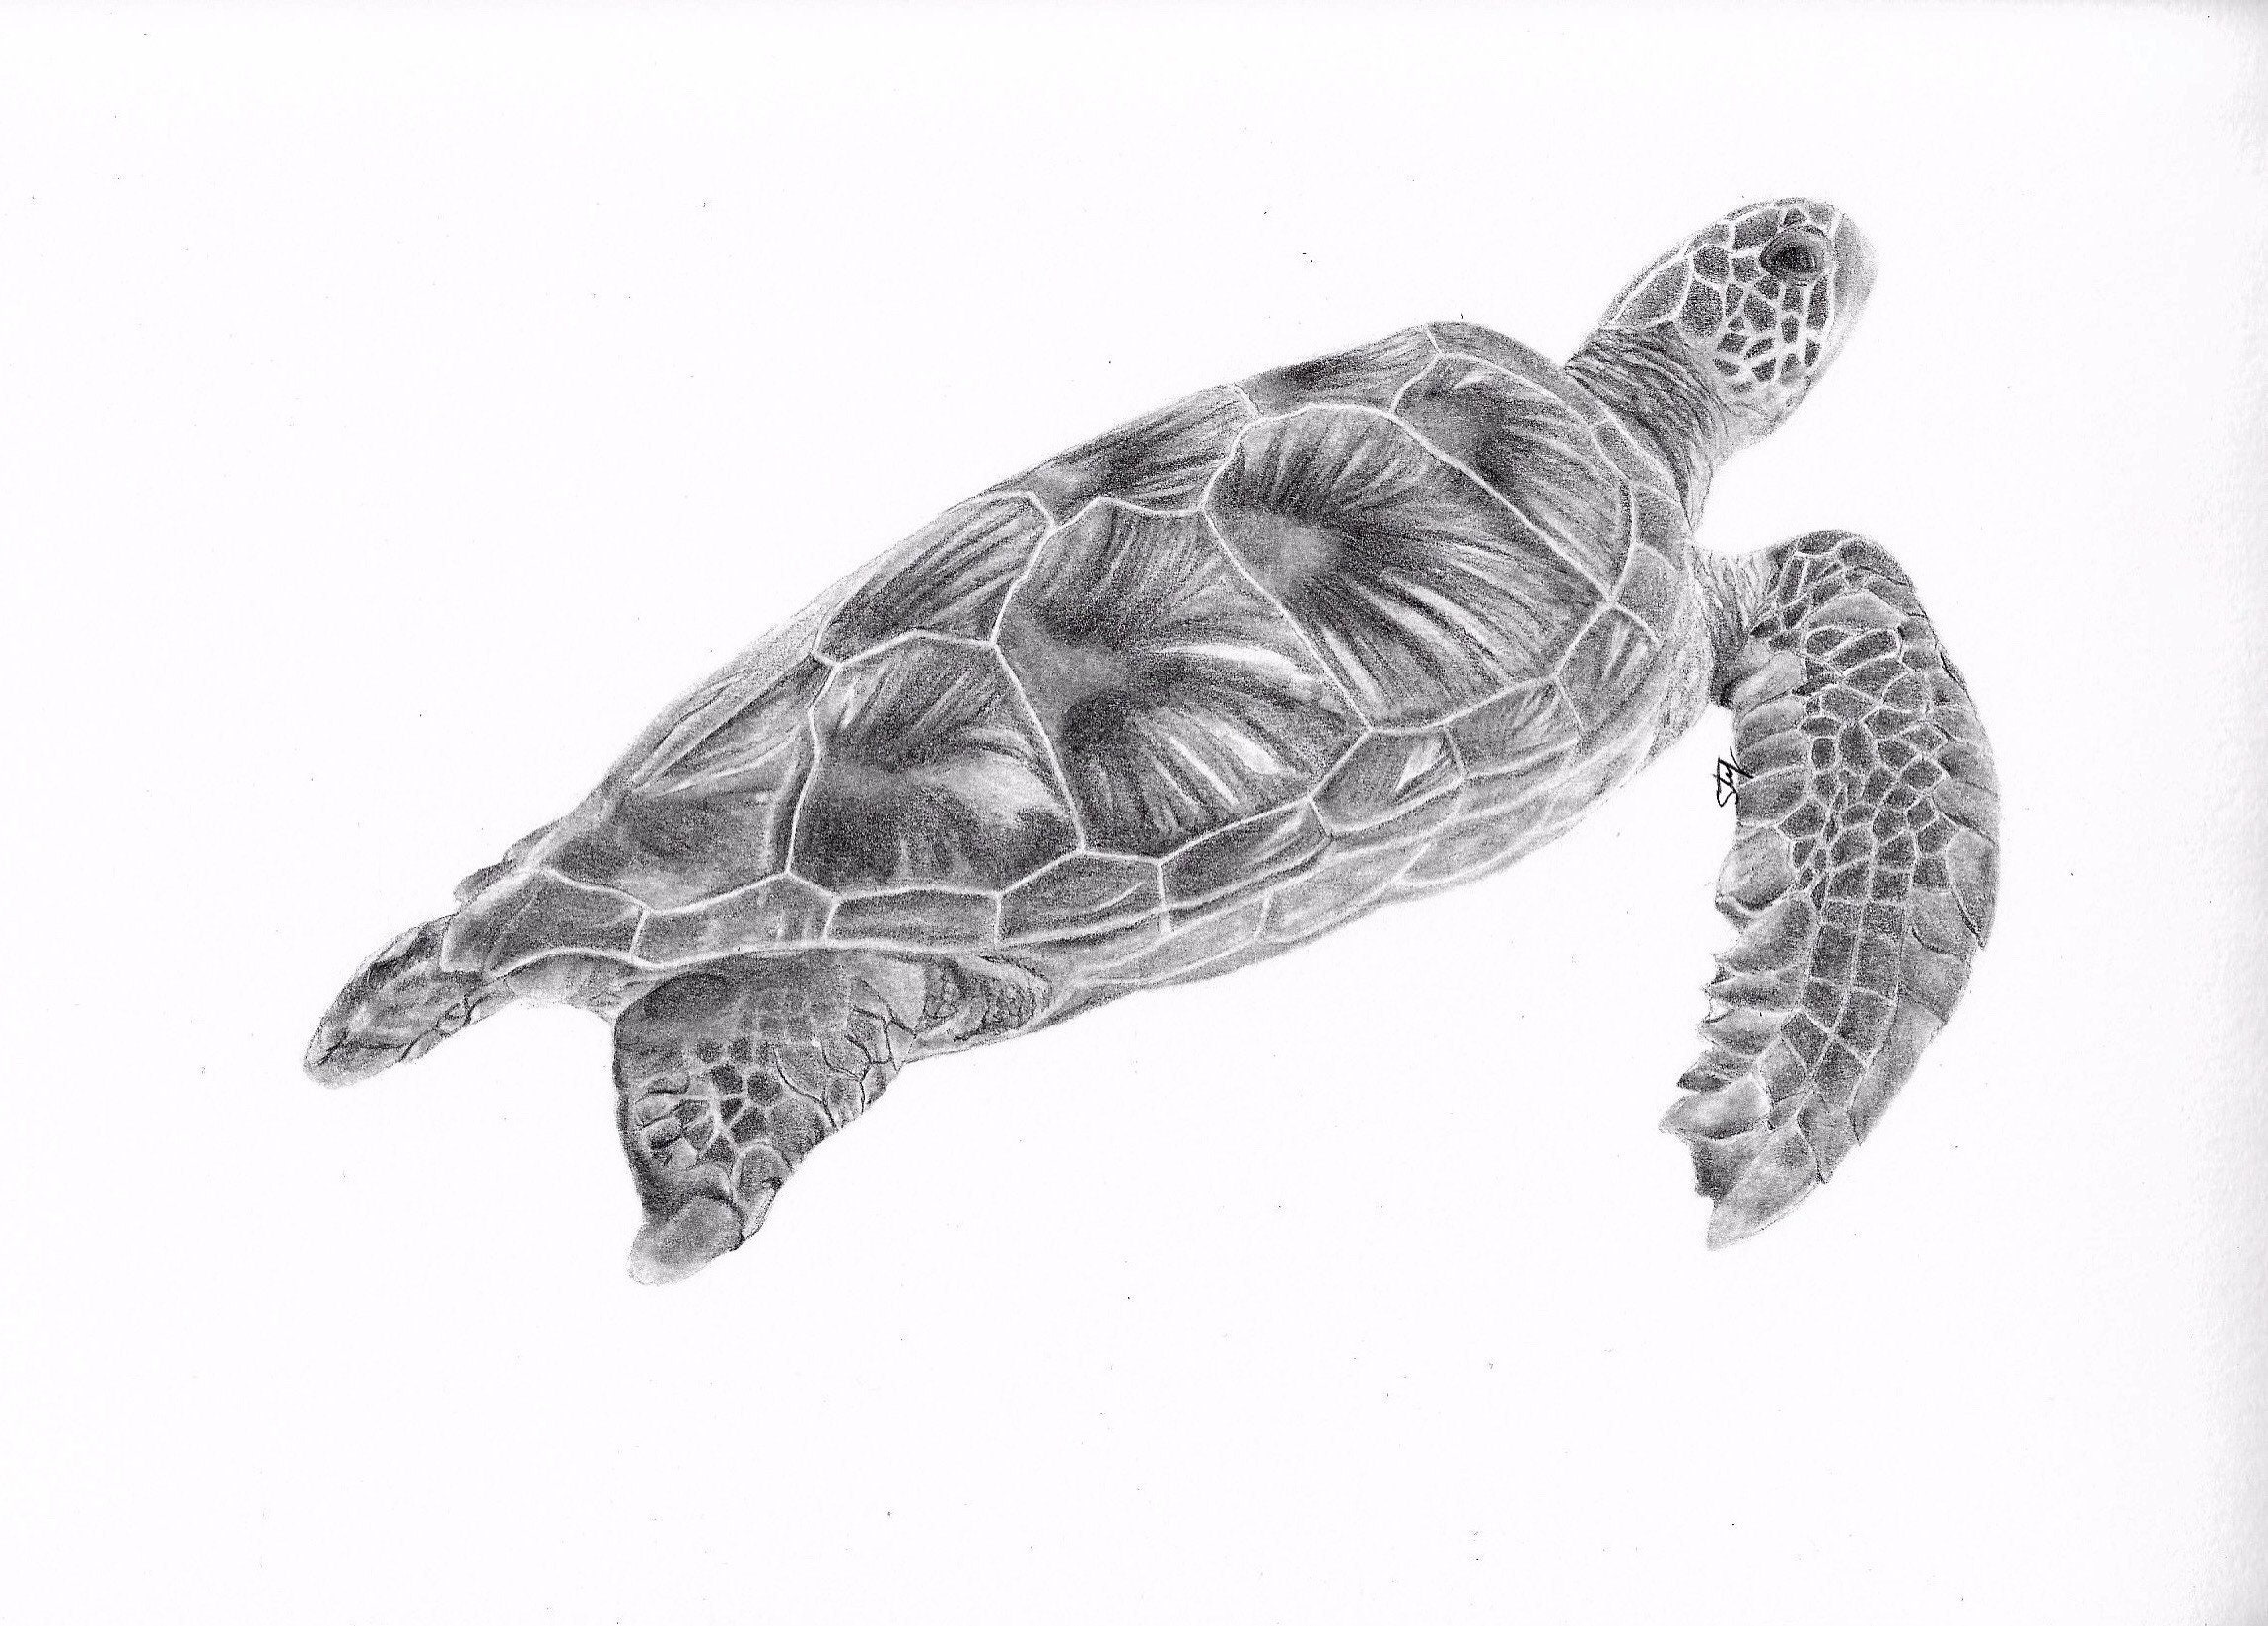 How to Draw a Sea Turtle Step by Step - Let's Draw Today